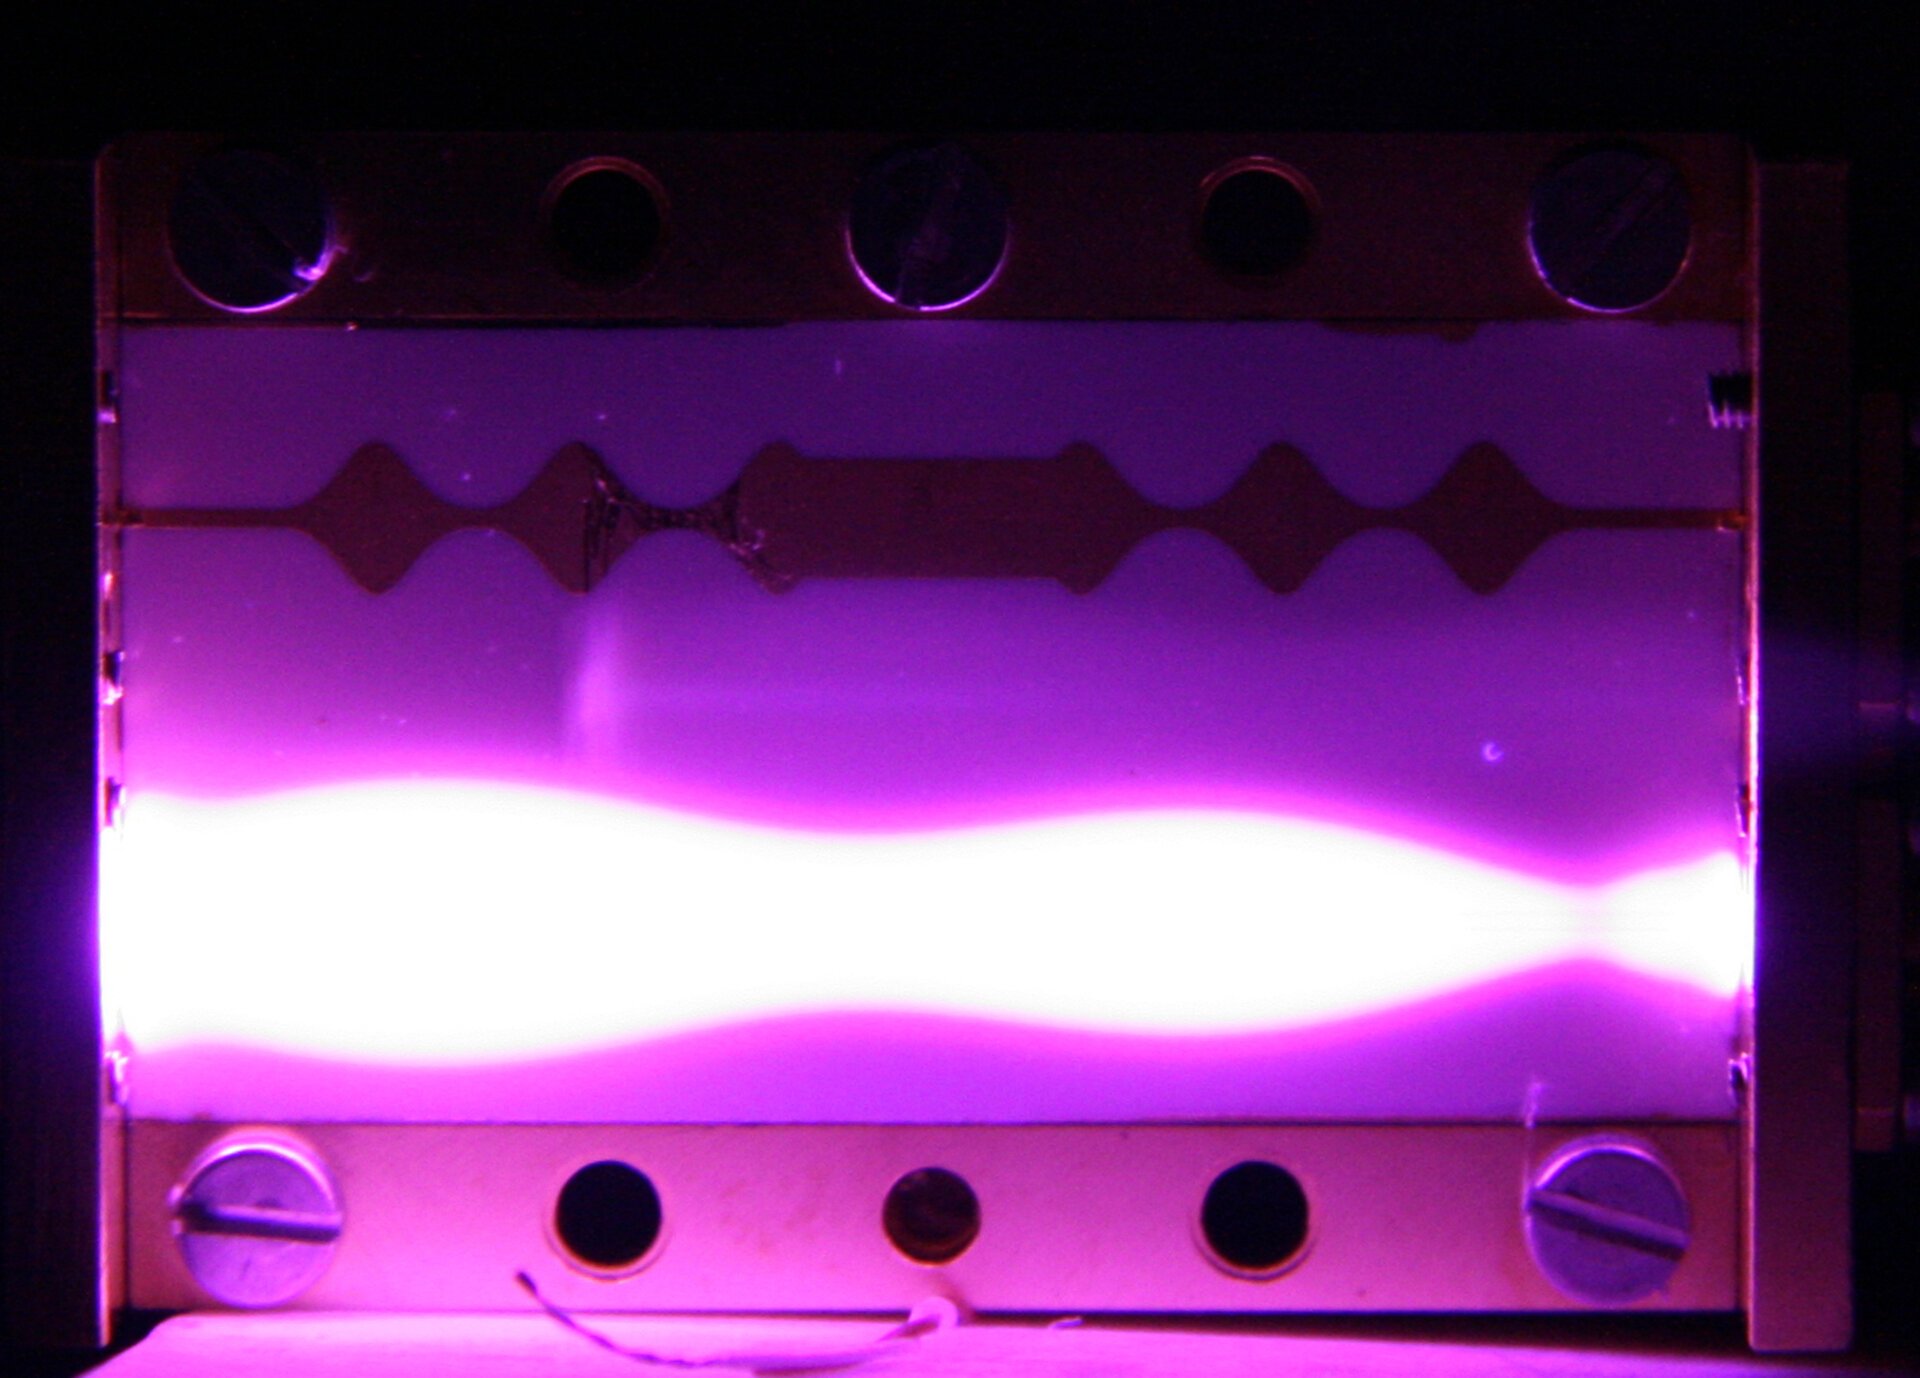 Corona discharge glow in a microstrip RF component tested at ESTEC